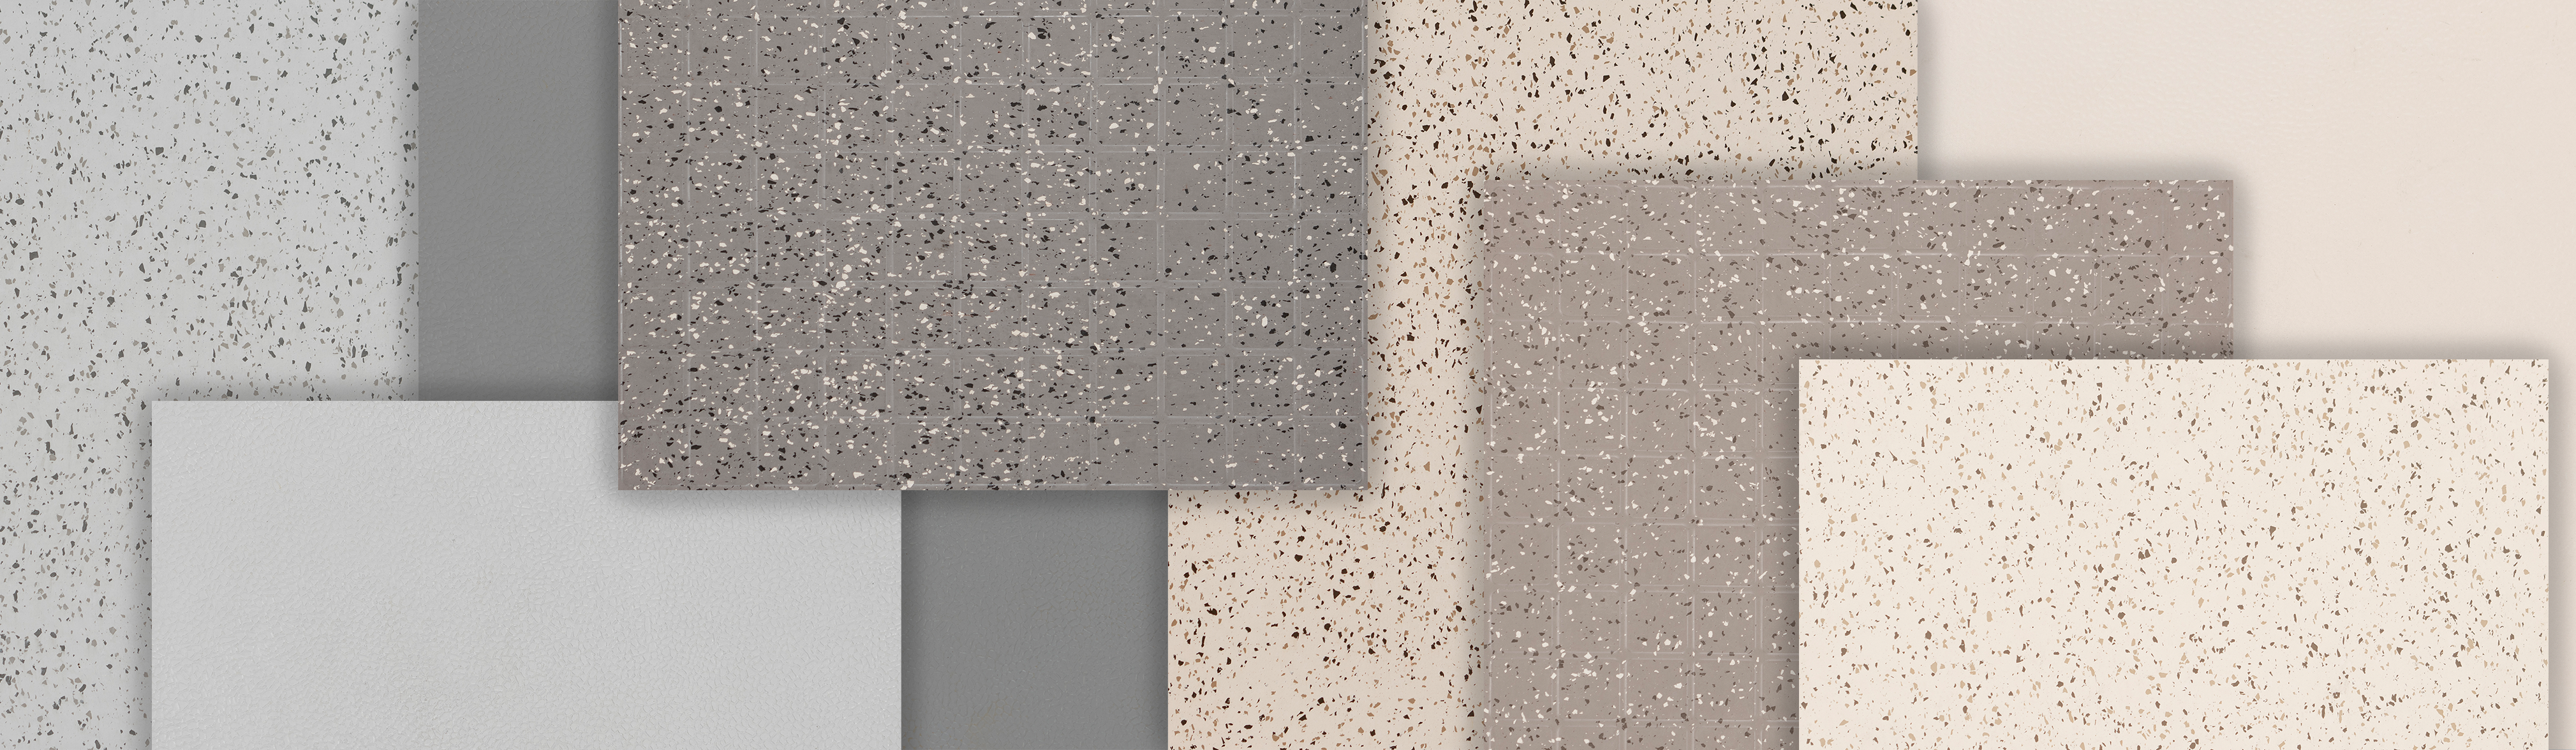 Community Suburban Solid and Speckled Rubber Tile